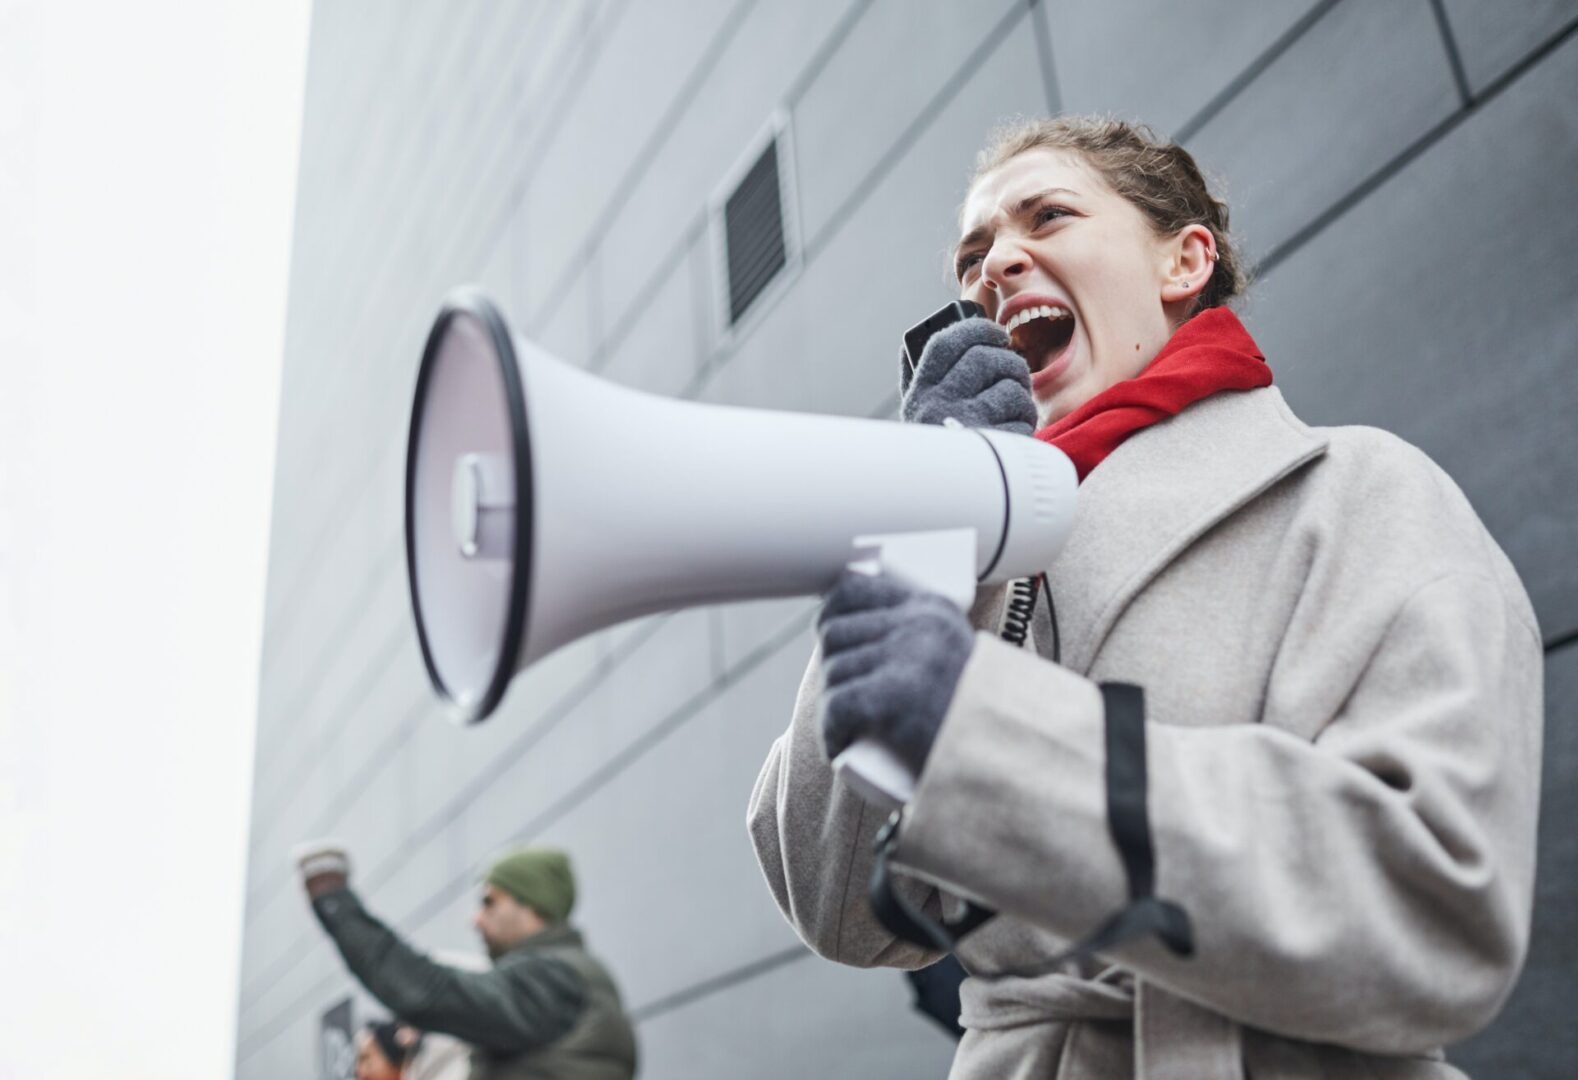 A woman is holding a megaphone and screaming.